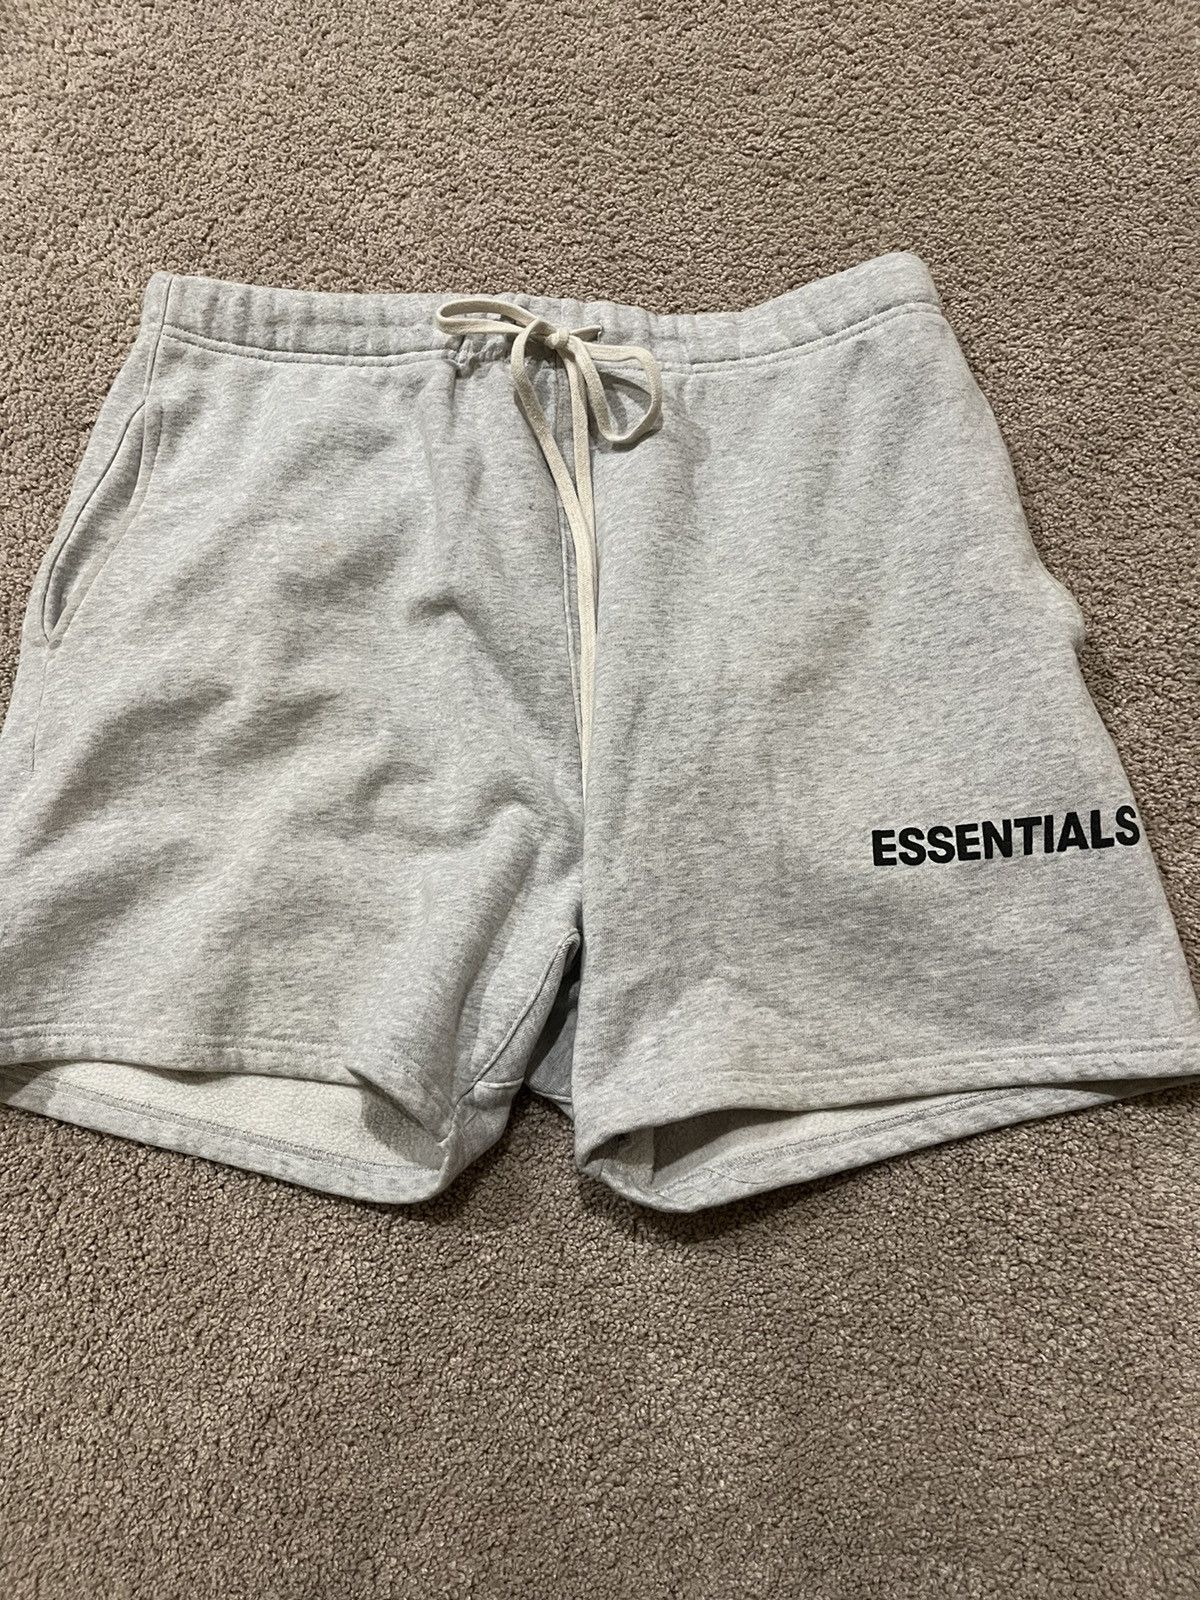 Essentials Fear of god essentials graphic sweat shorts ss18 | Grailed